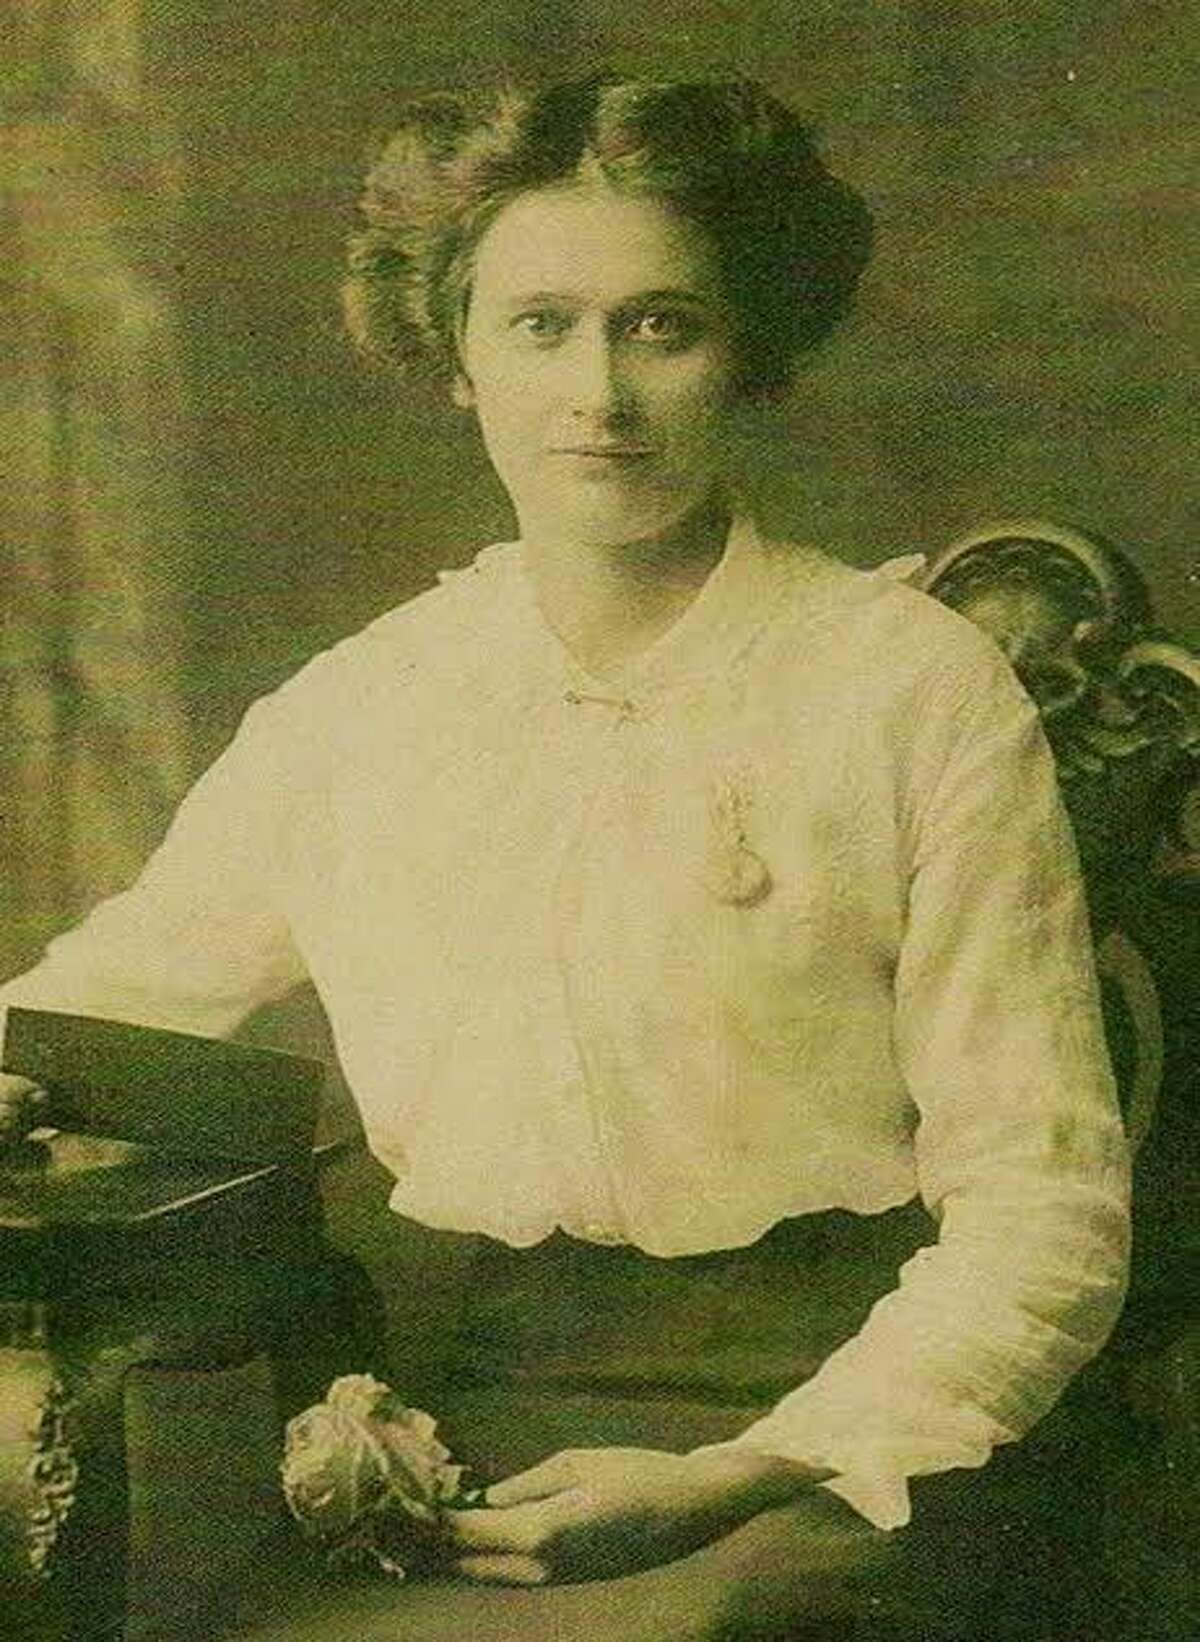 Catherine O’Connell: One of three Irish sisters who worked in New Haven and Derby in early 20th century.